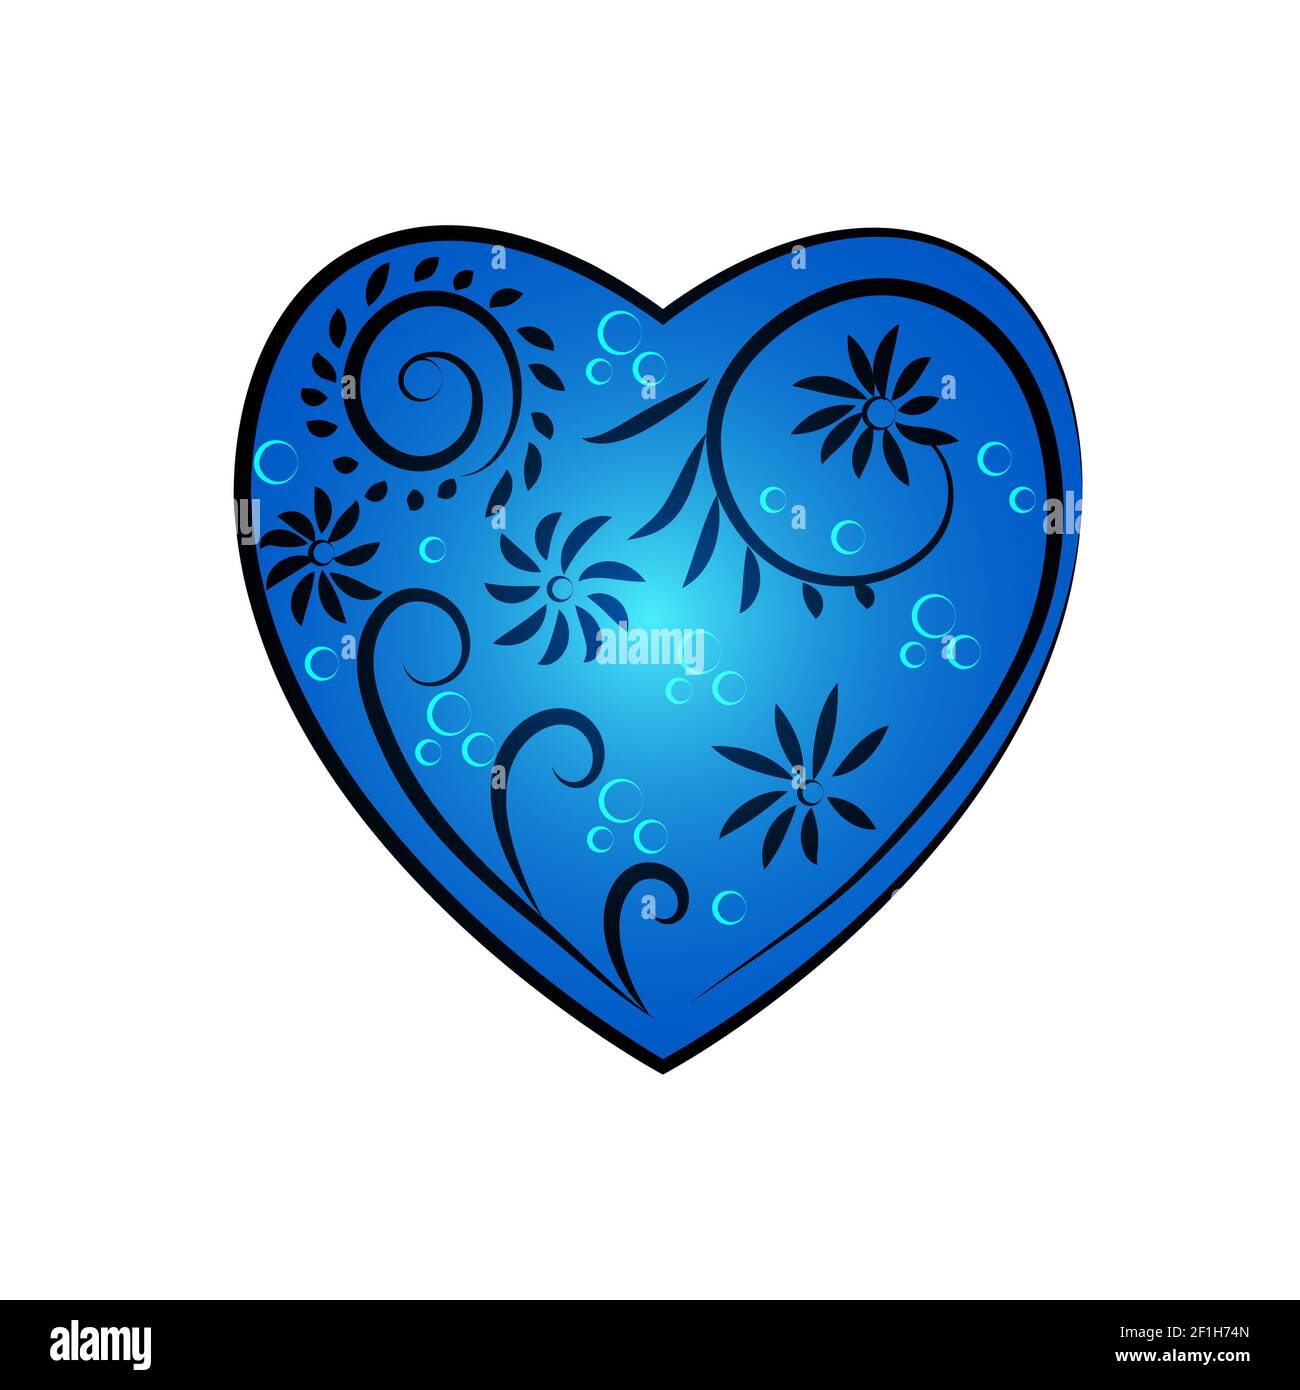 Patterned heart Stock Photo